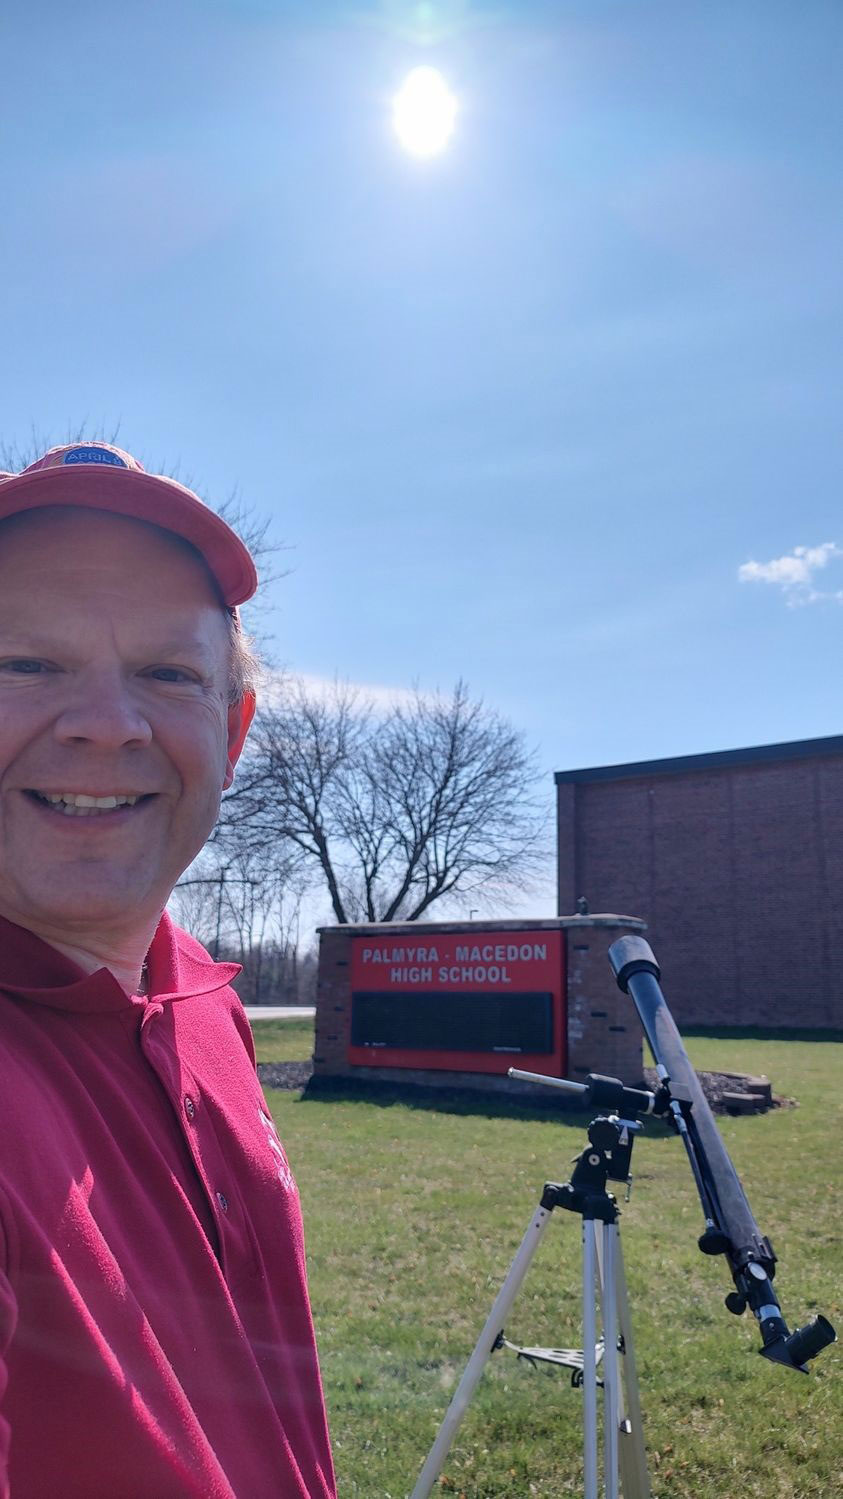 Palmyra-Macedon Faculty Association member Joseph Perry prepares for the total solar eclipse one year before the big day on April 8, 2023 at 3:22 p.m.